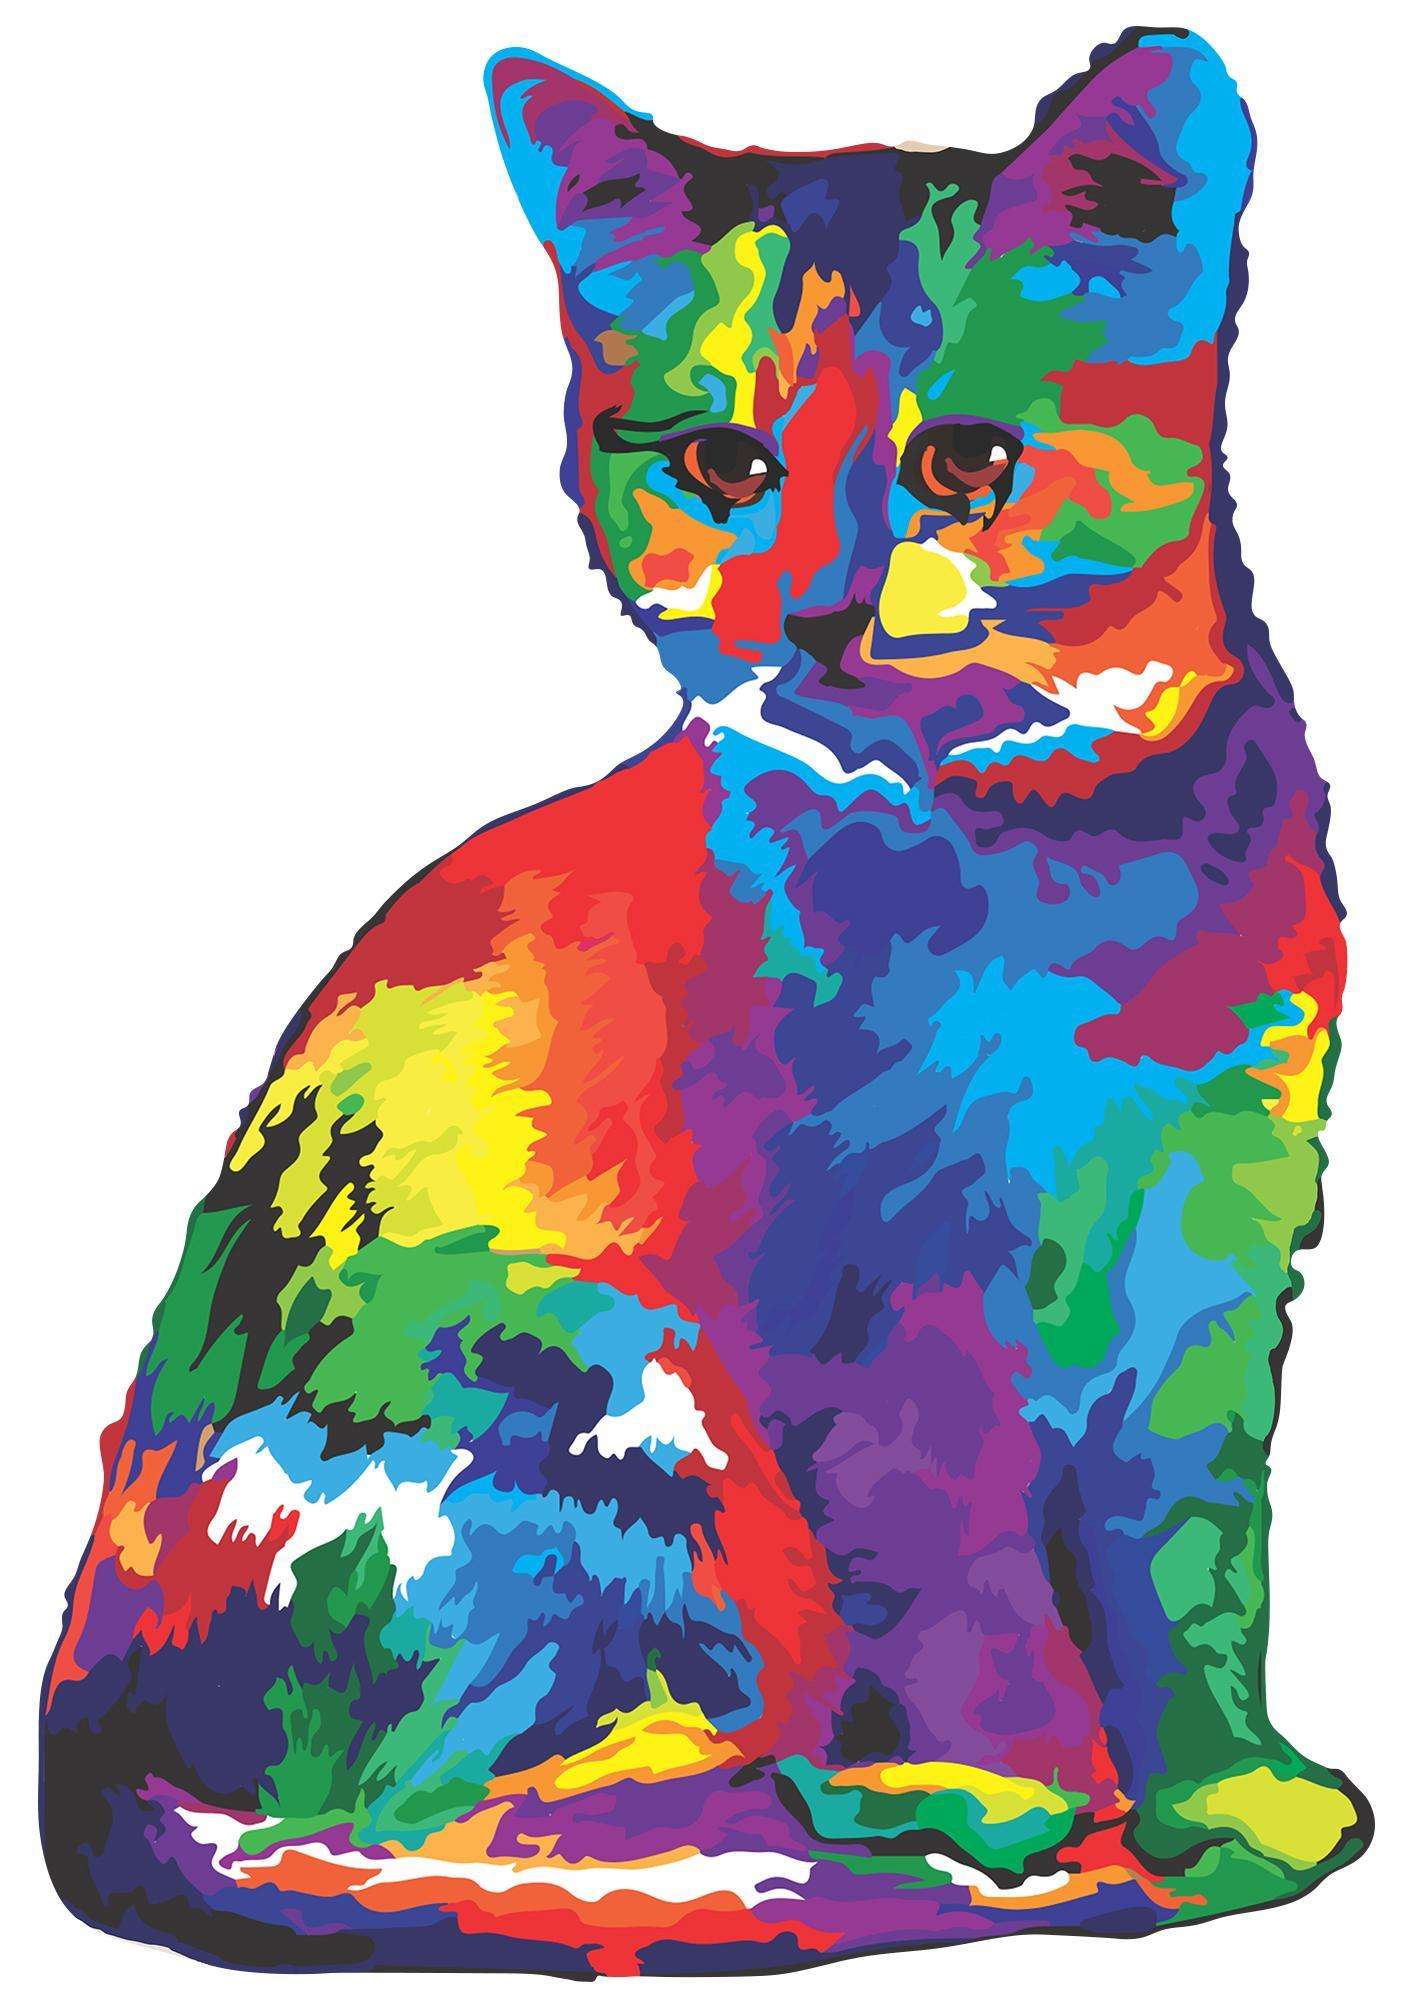 Colourful cat wooden puzzle